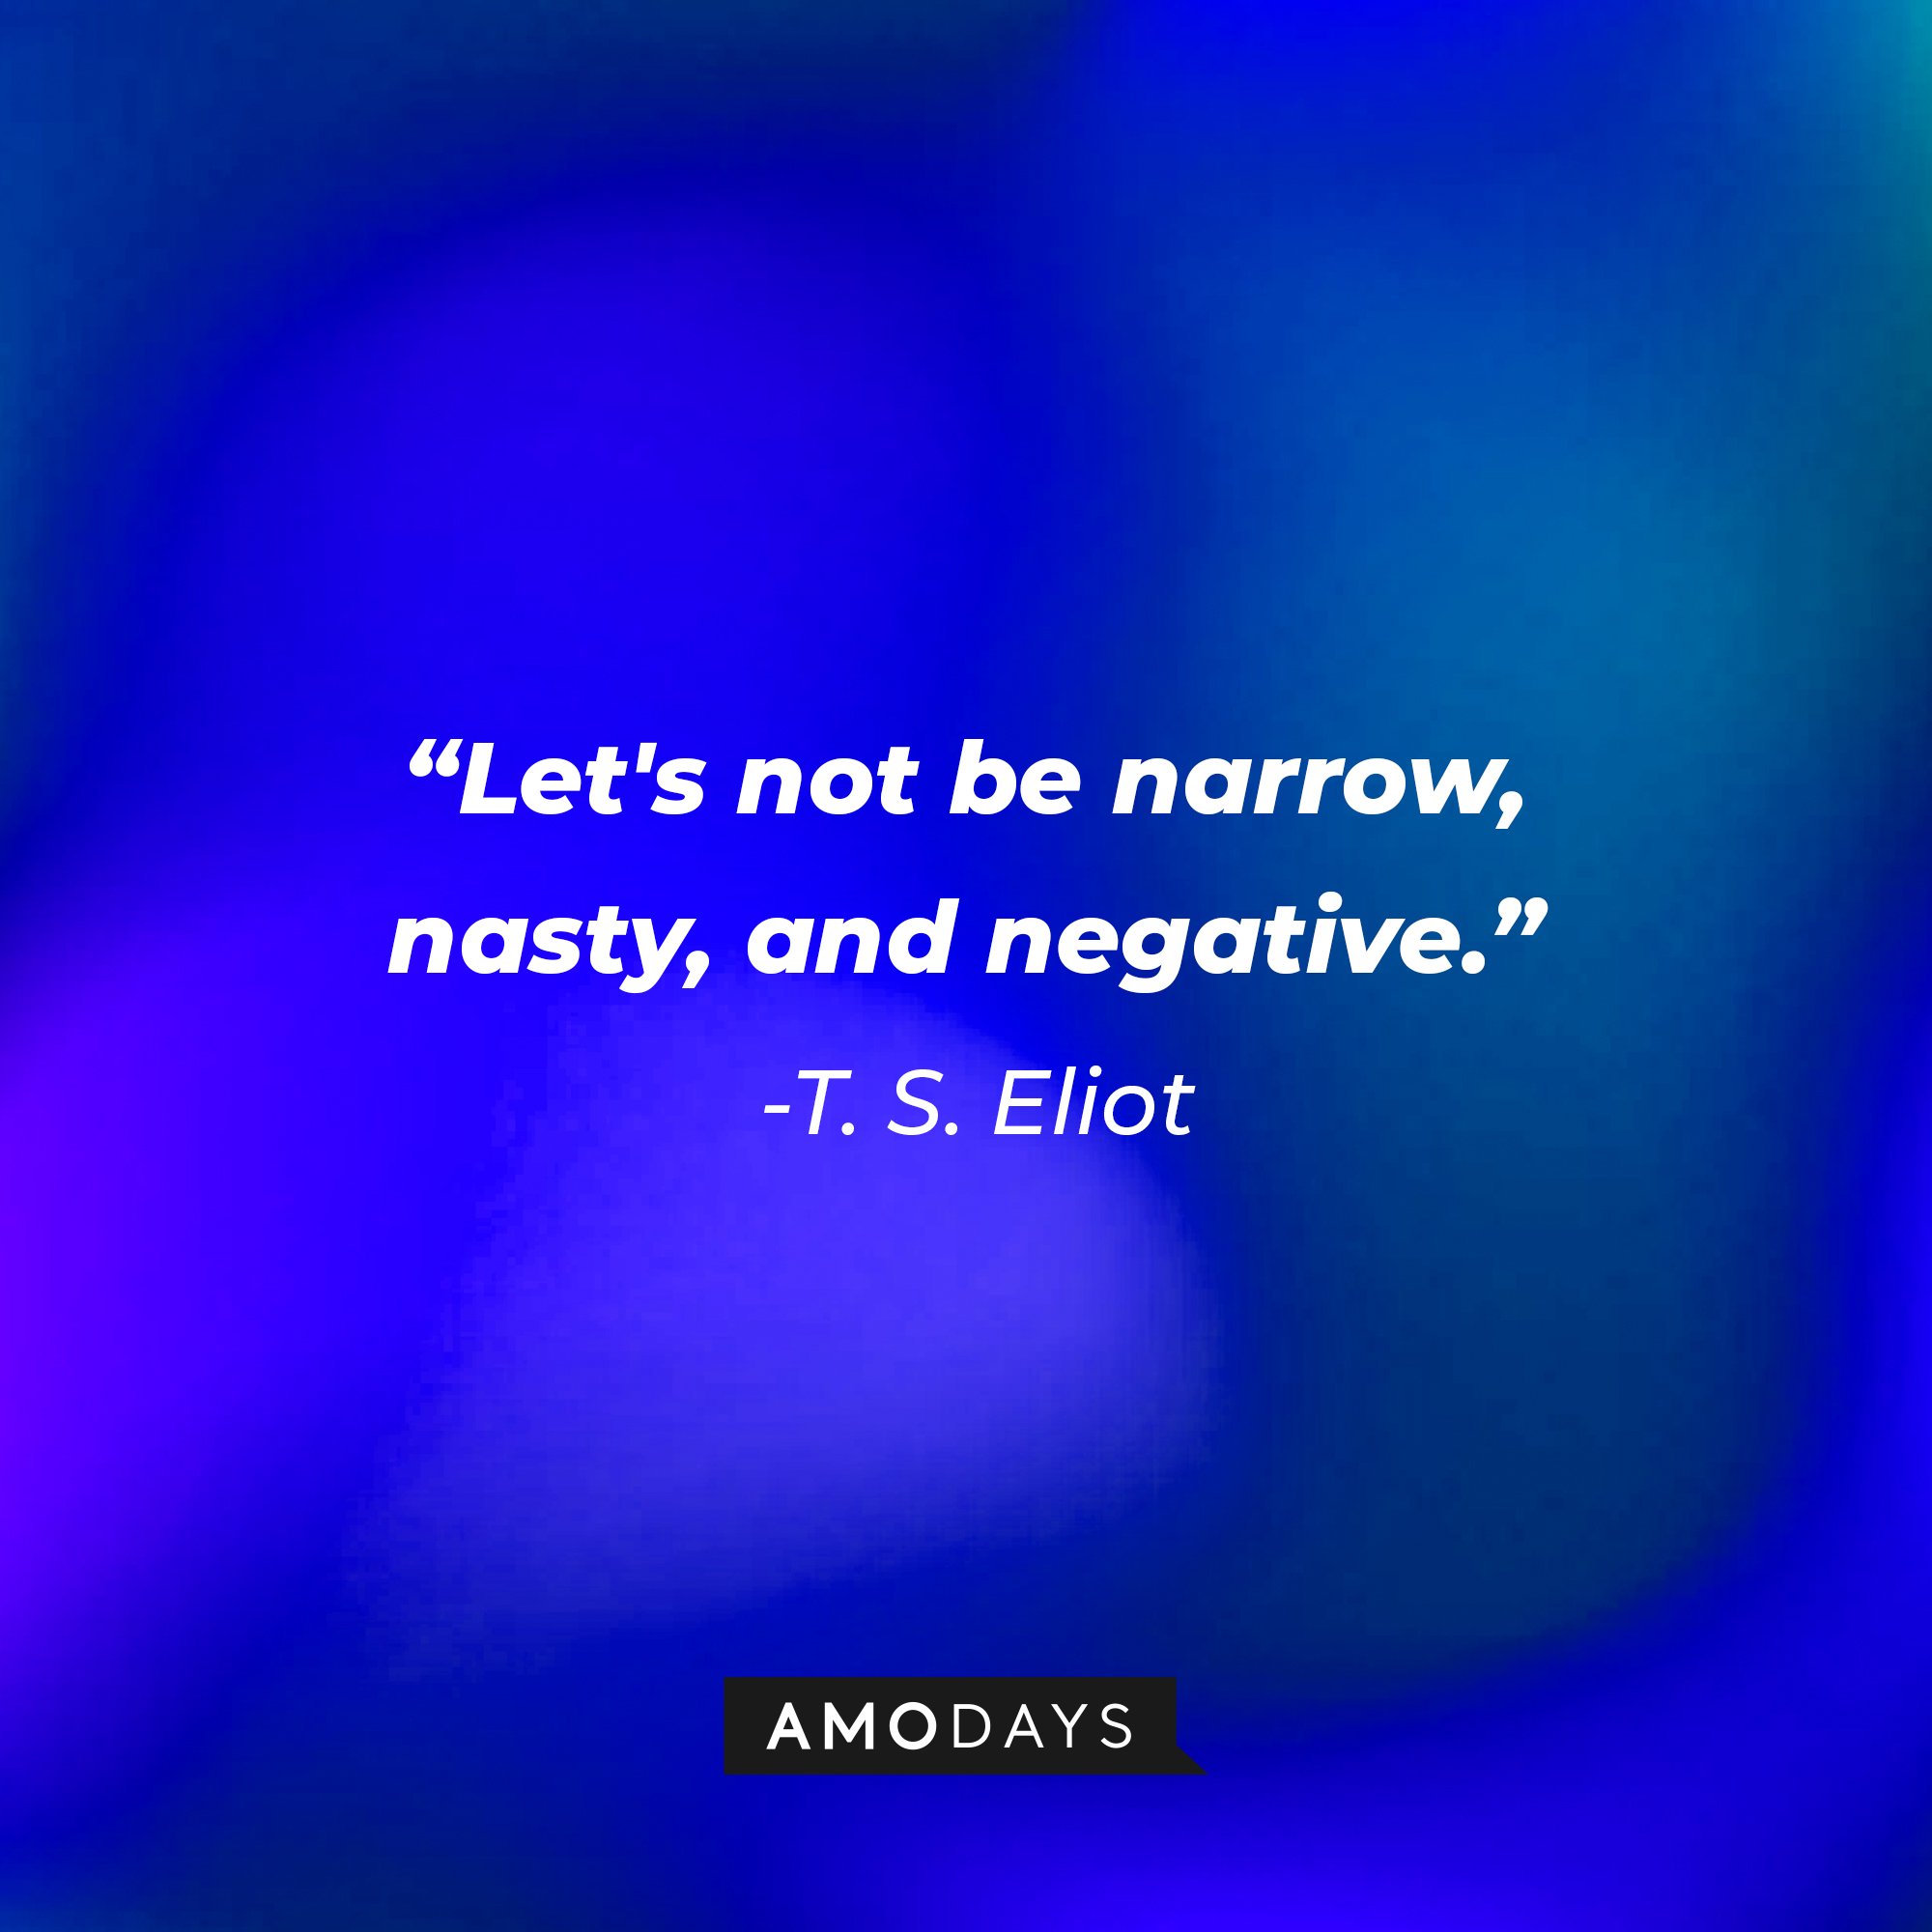 T. S. Eliot’s quote: "Let's not be narrow, nasty, and negative." | Image: AmoDays 